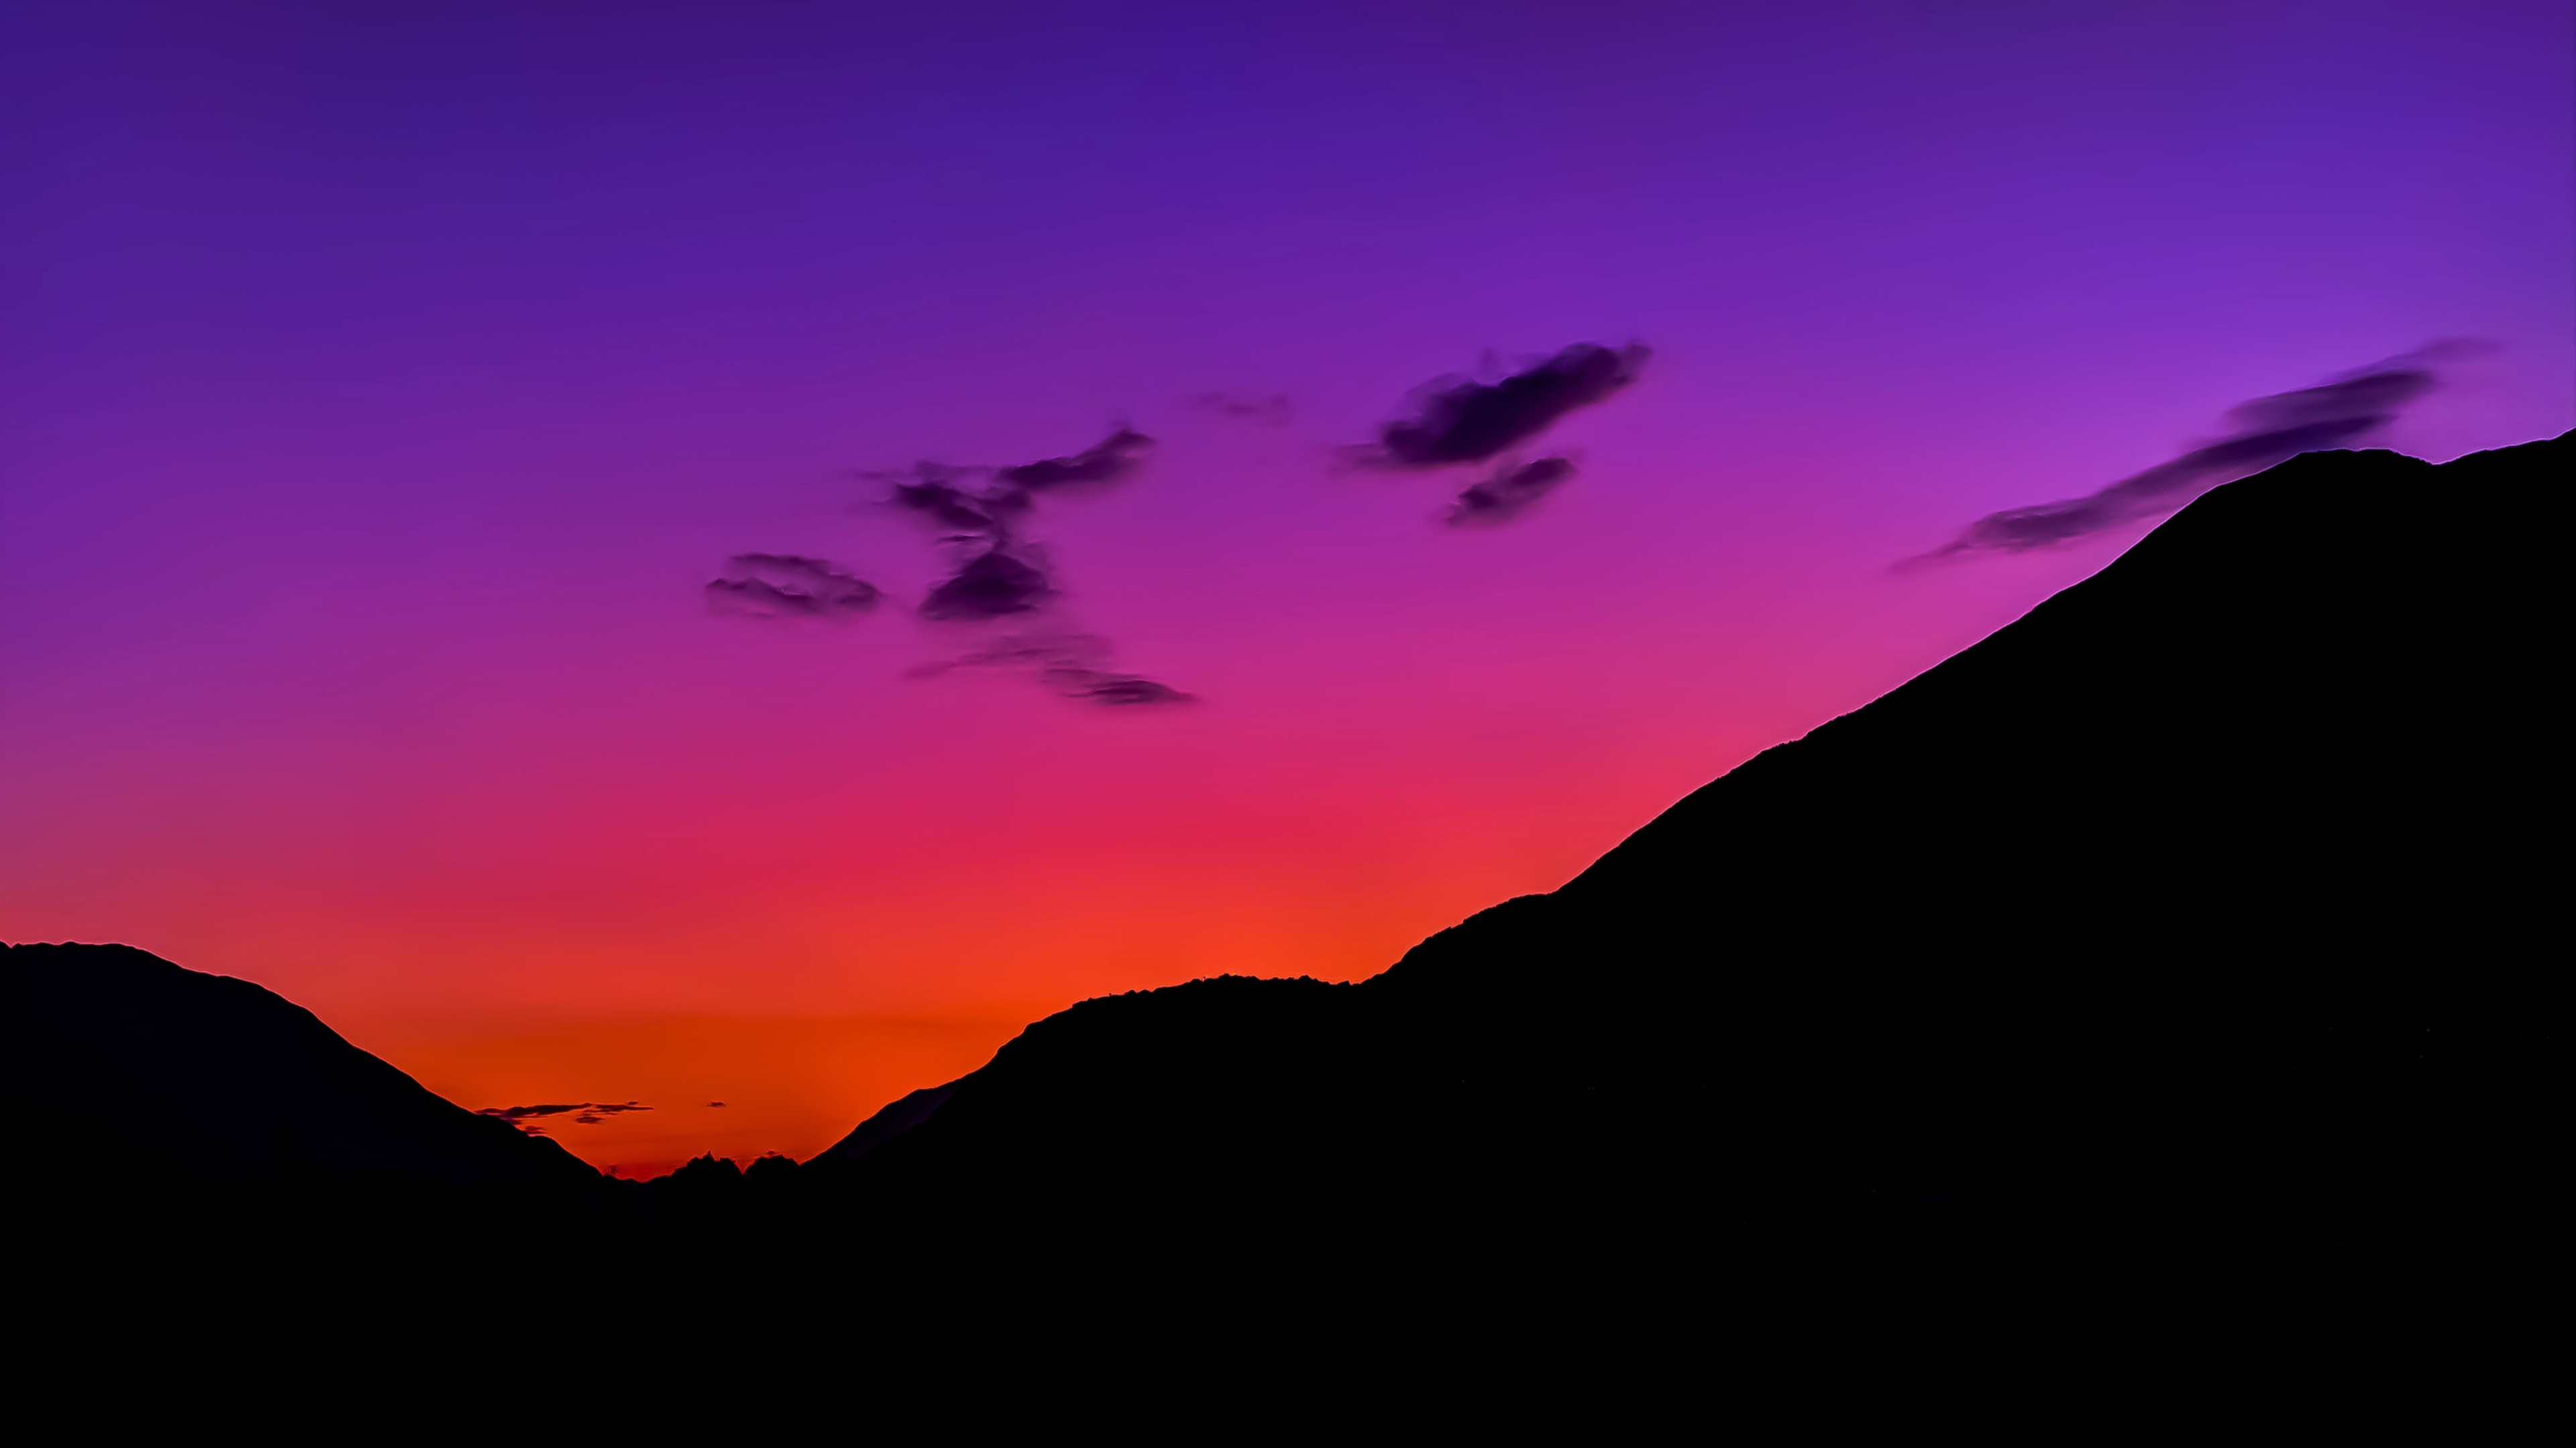 Sunset 4K wallpaper for your desktop or mobile screen free and easy to download